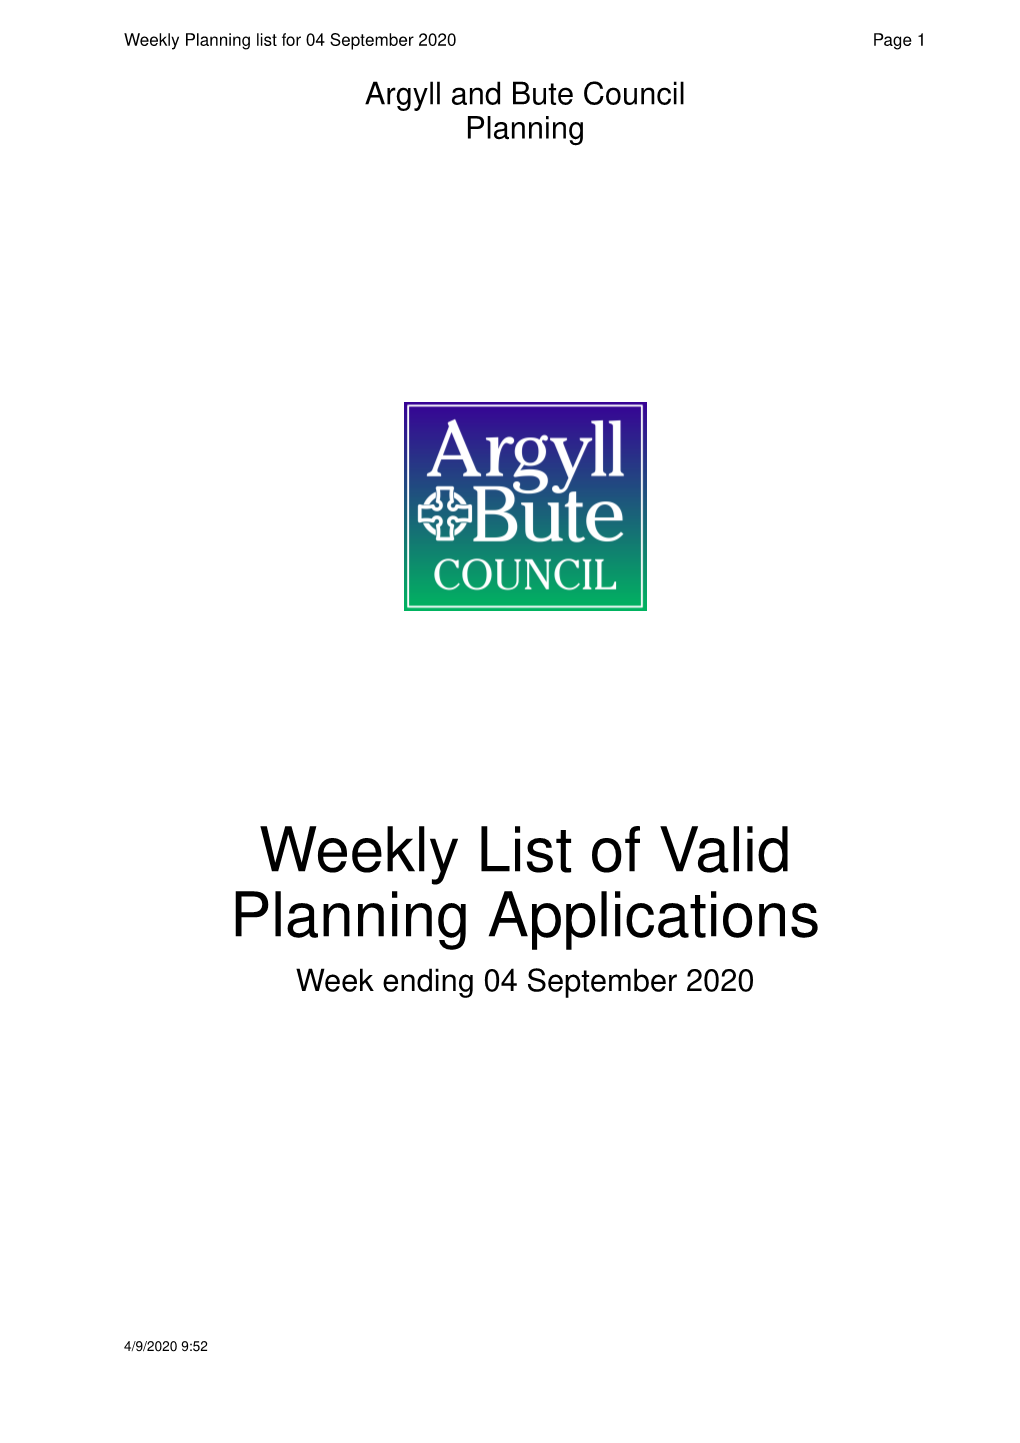 Weekly List of Valid Planning Applications 4Th September 2020.Pdf